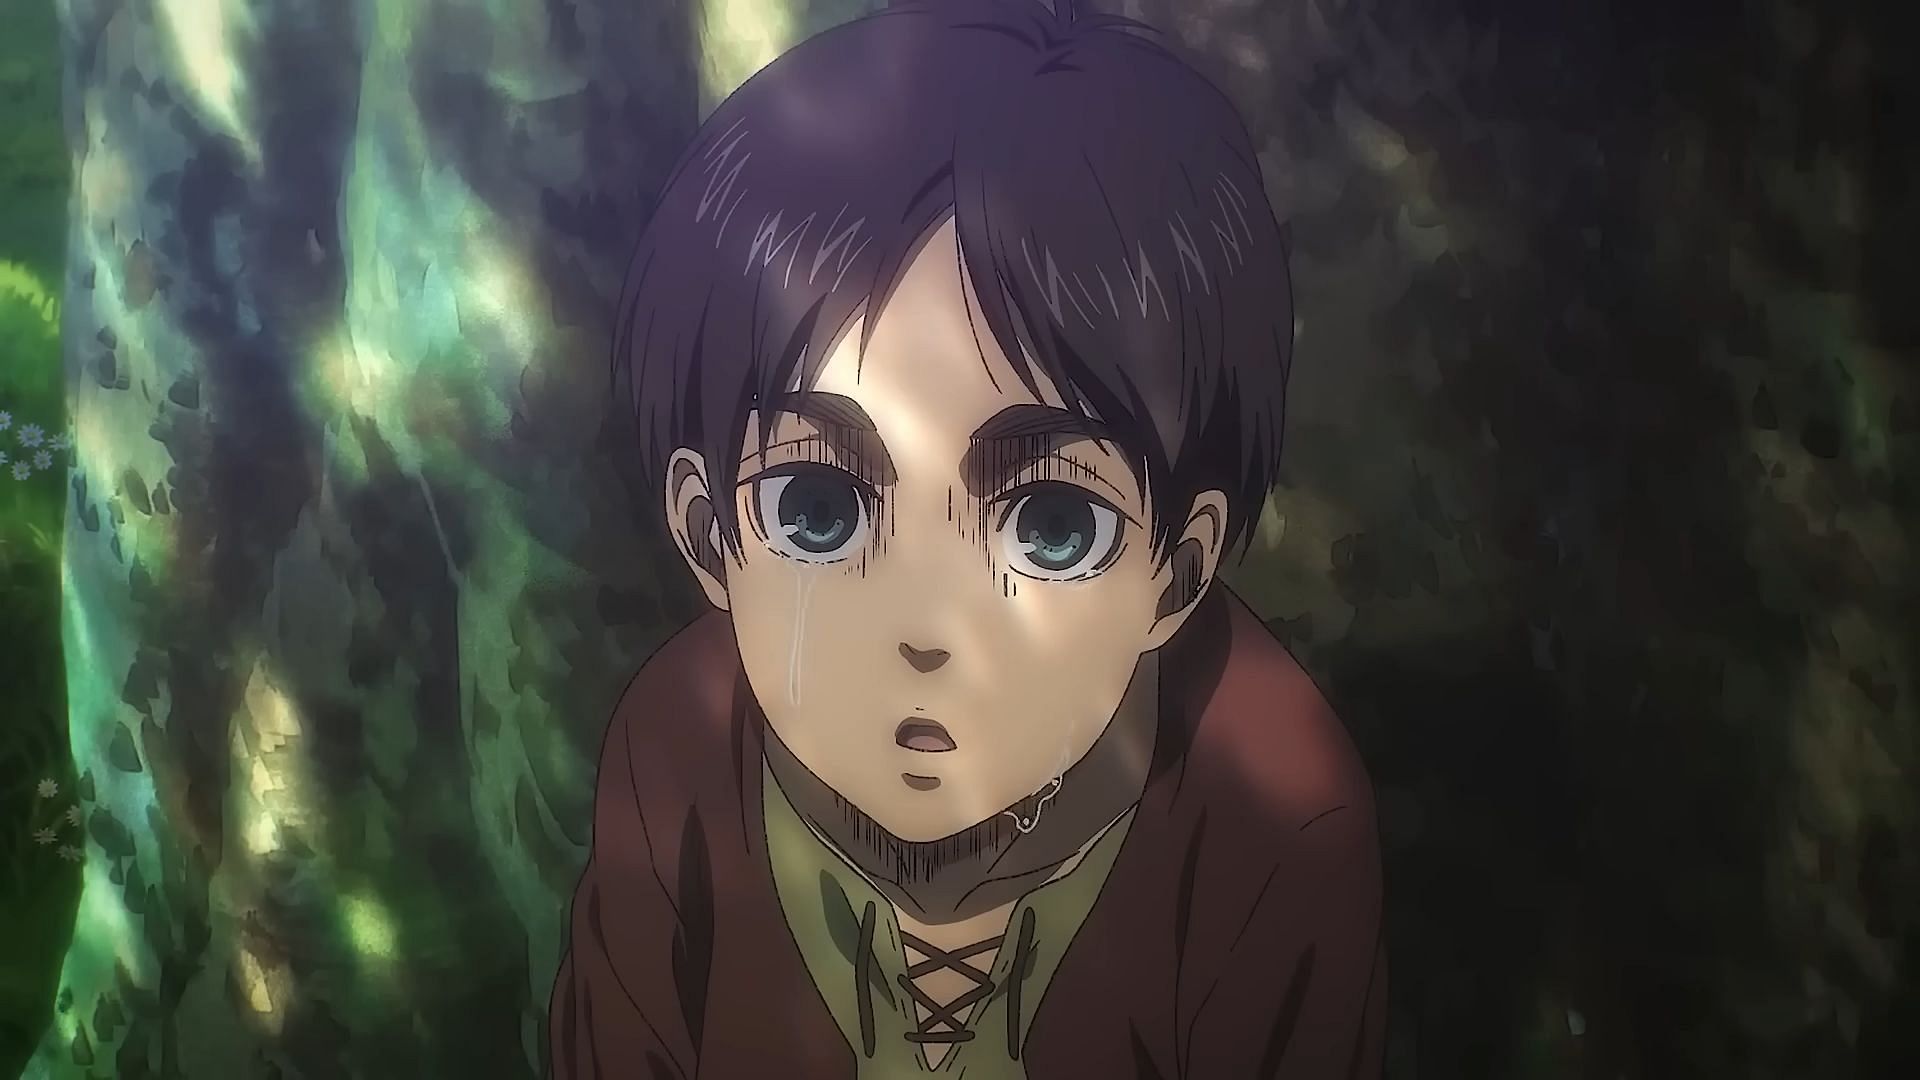 Attack on Titan Final Season Part 3 Episode 1 will be an hour